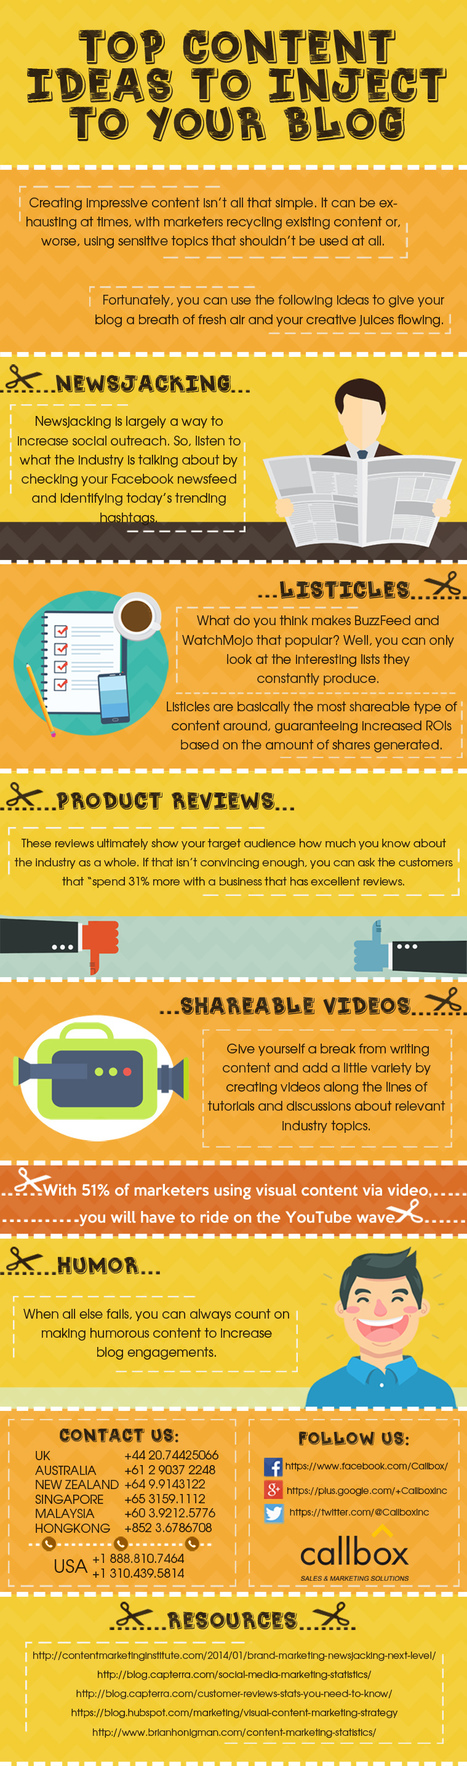 Top 5 Content Ideas to Inject in your Blog [INFOGRAPHIC] | digital marketing strategy | Scoop.it